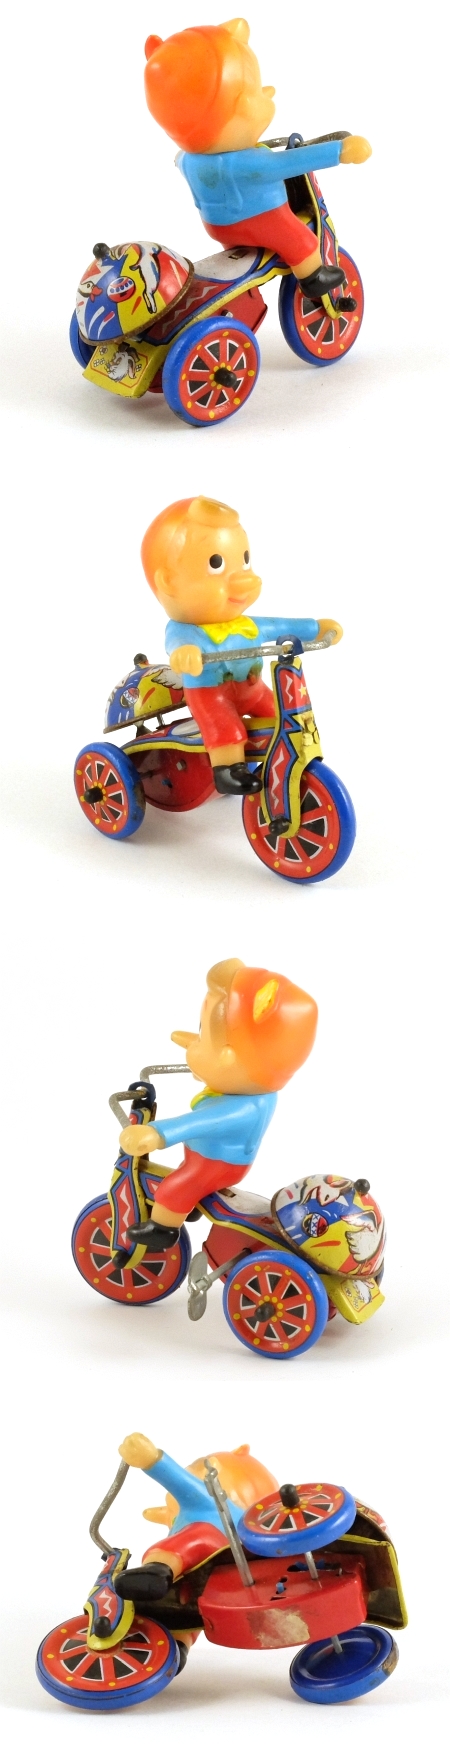 MTU Tricycle with Pinocchio rider